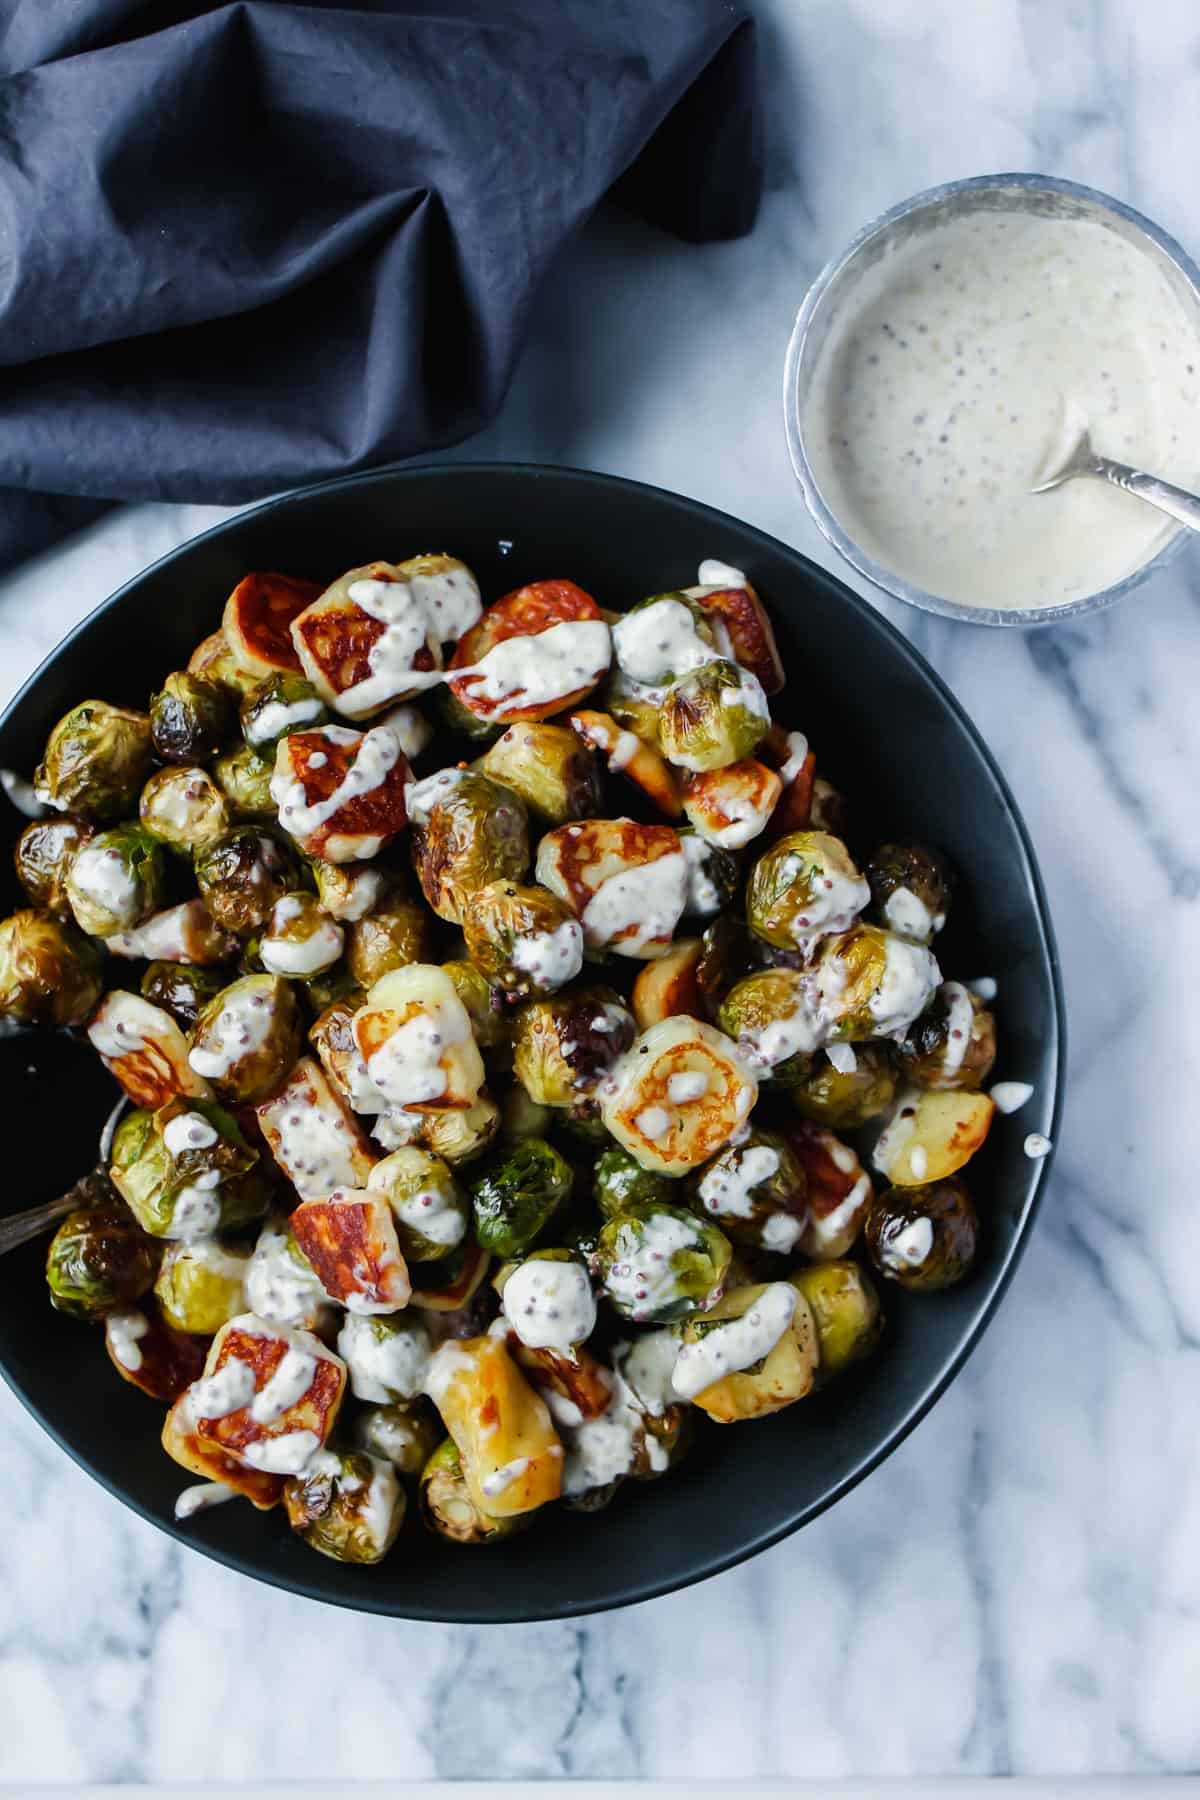 Halloumi Brussels Sprouts with Mustard Creme Sauce